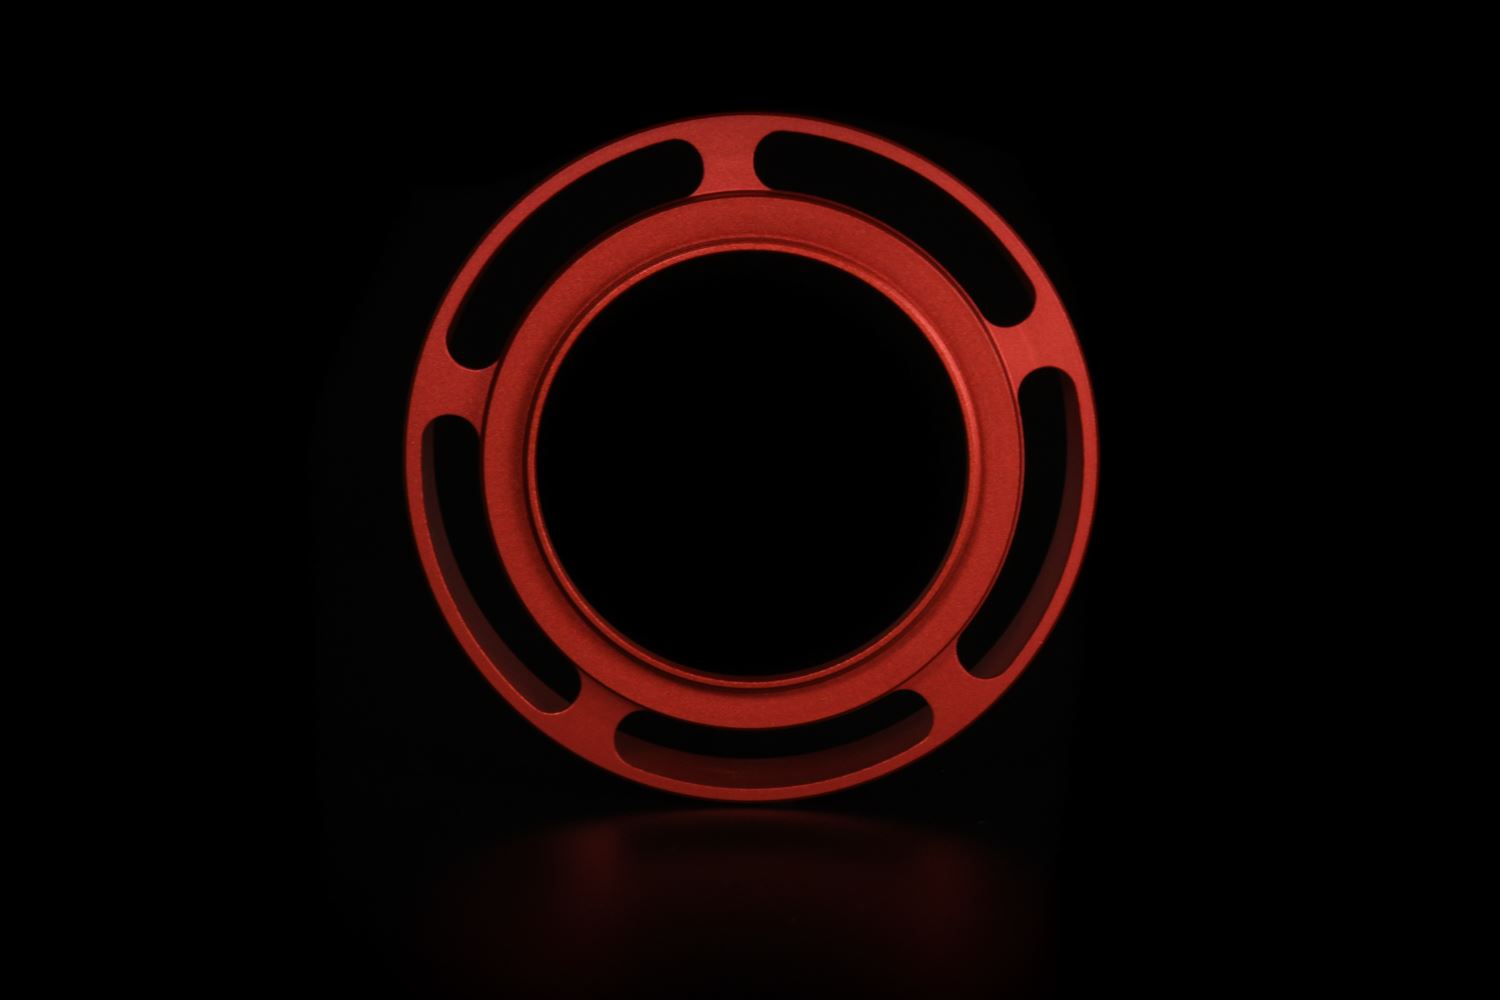 Picture of Red Ventilated Lens Hood made for Leica E46 lenses